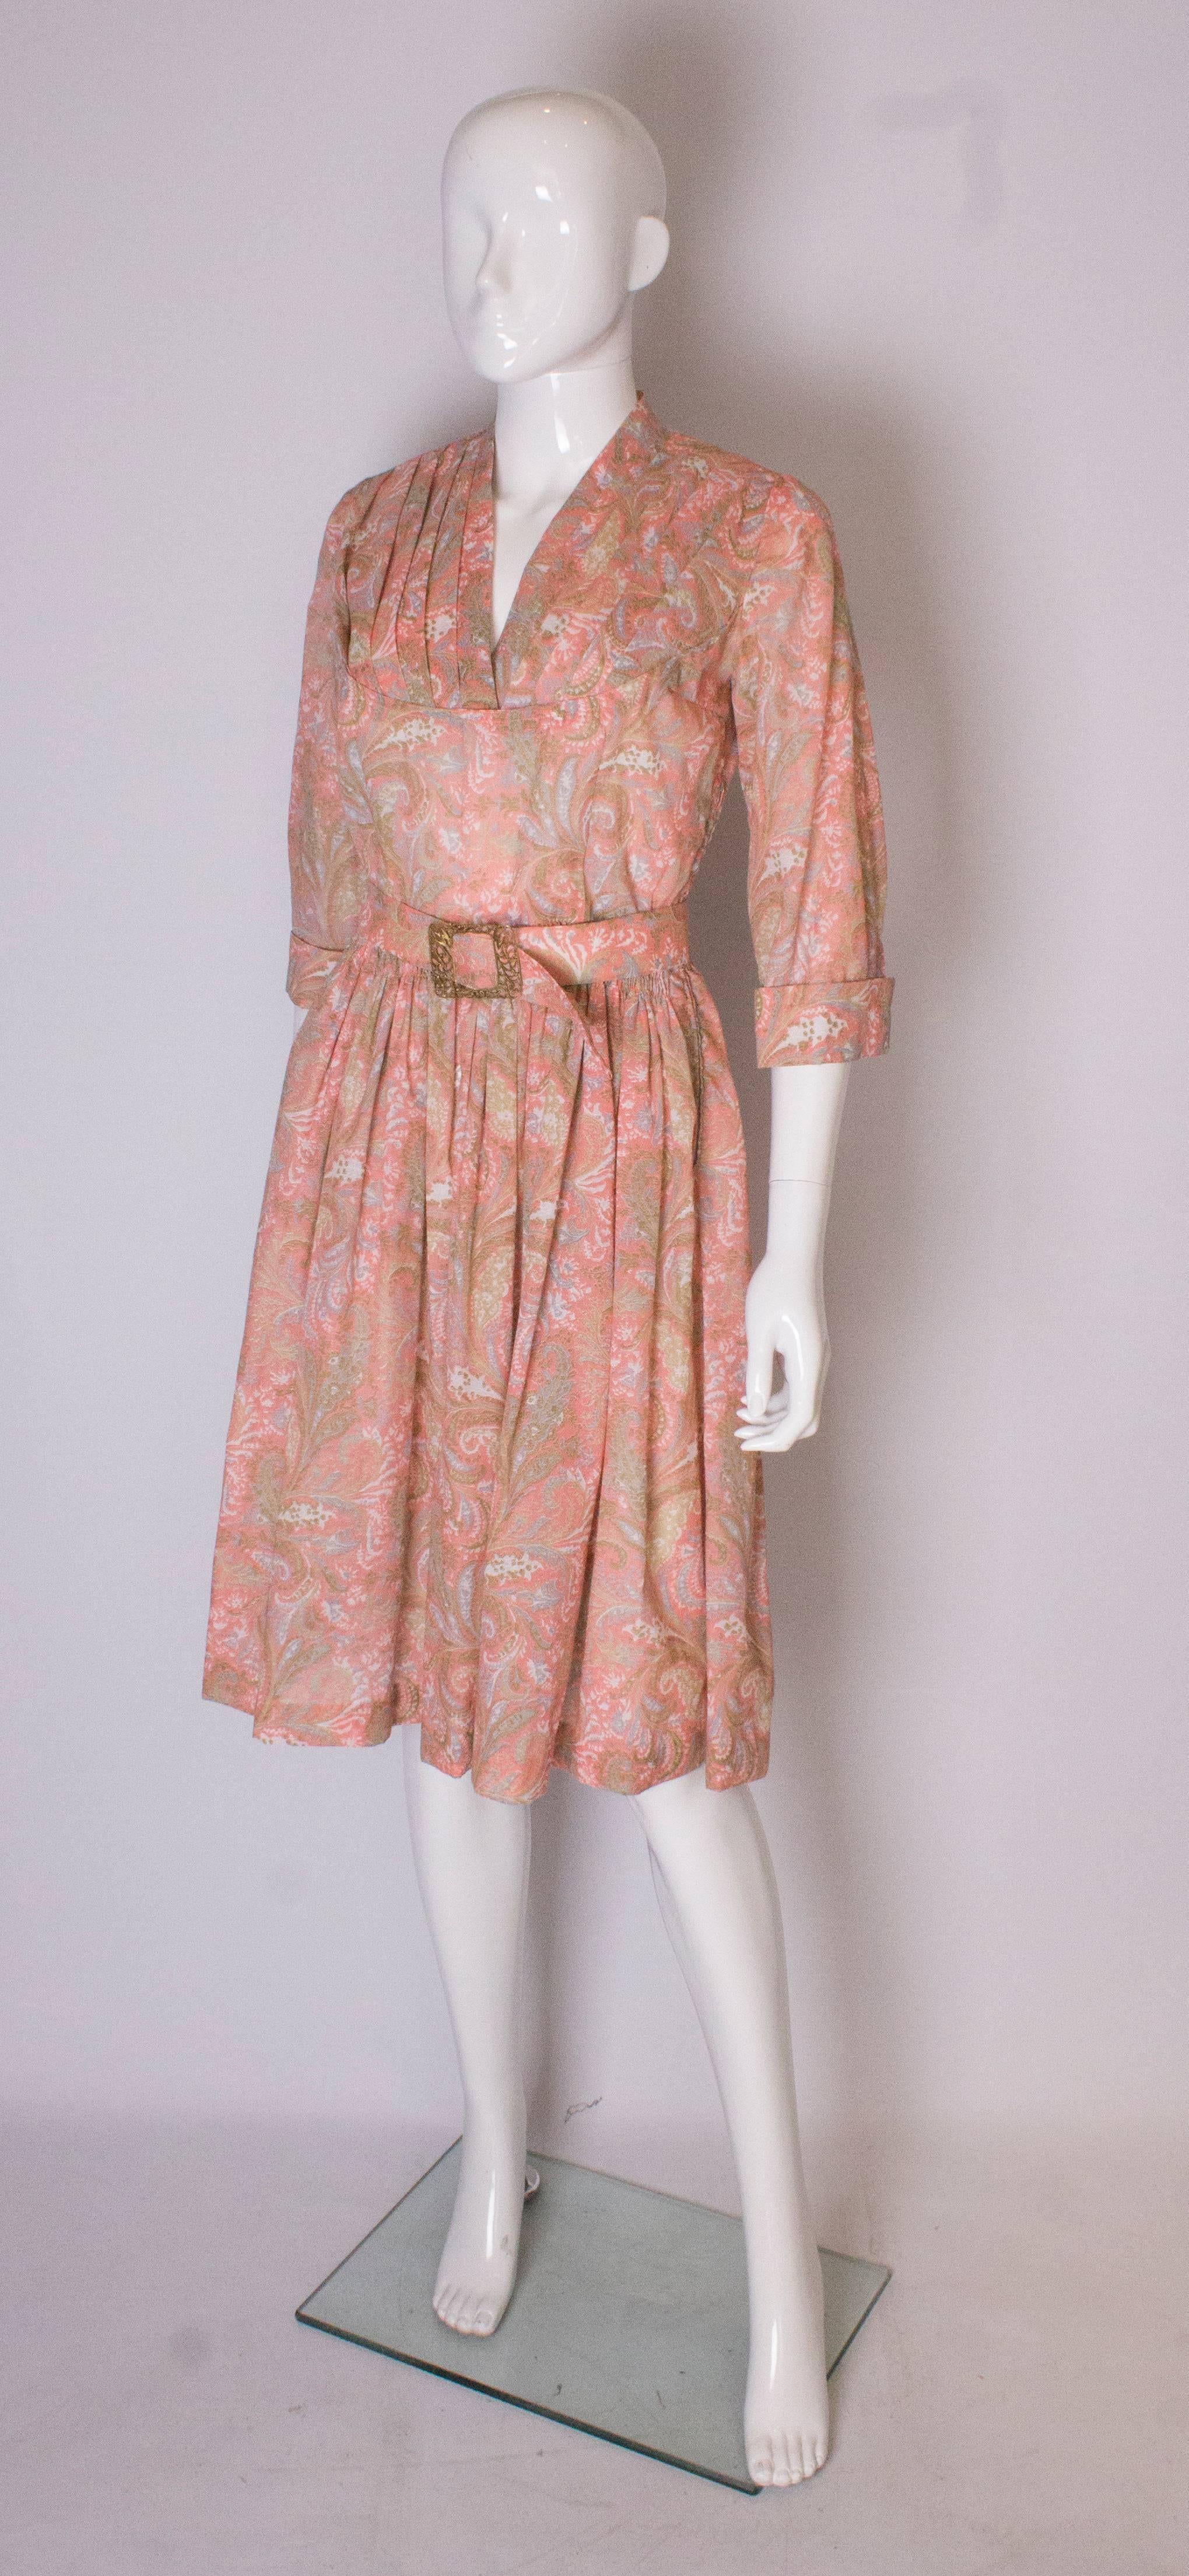 Brown A vintage 1950s Pretty printed cotton day Dress with matching Decorative Belt